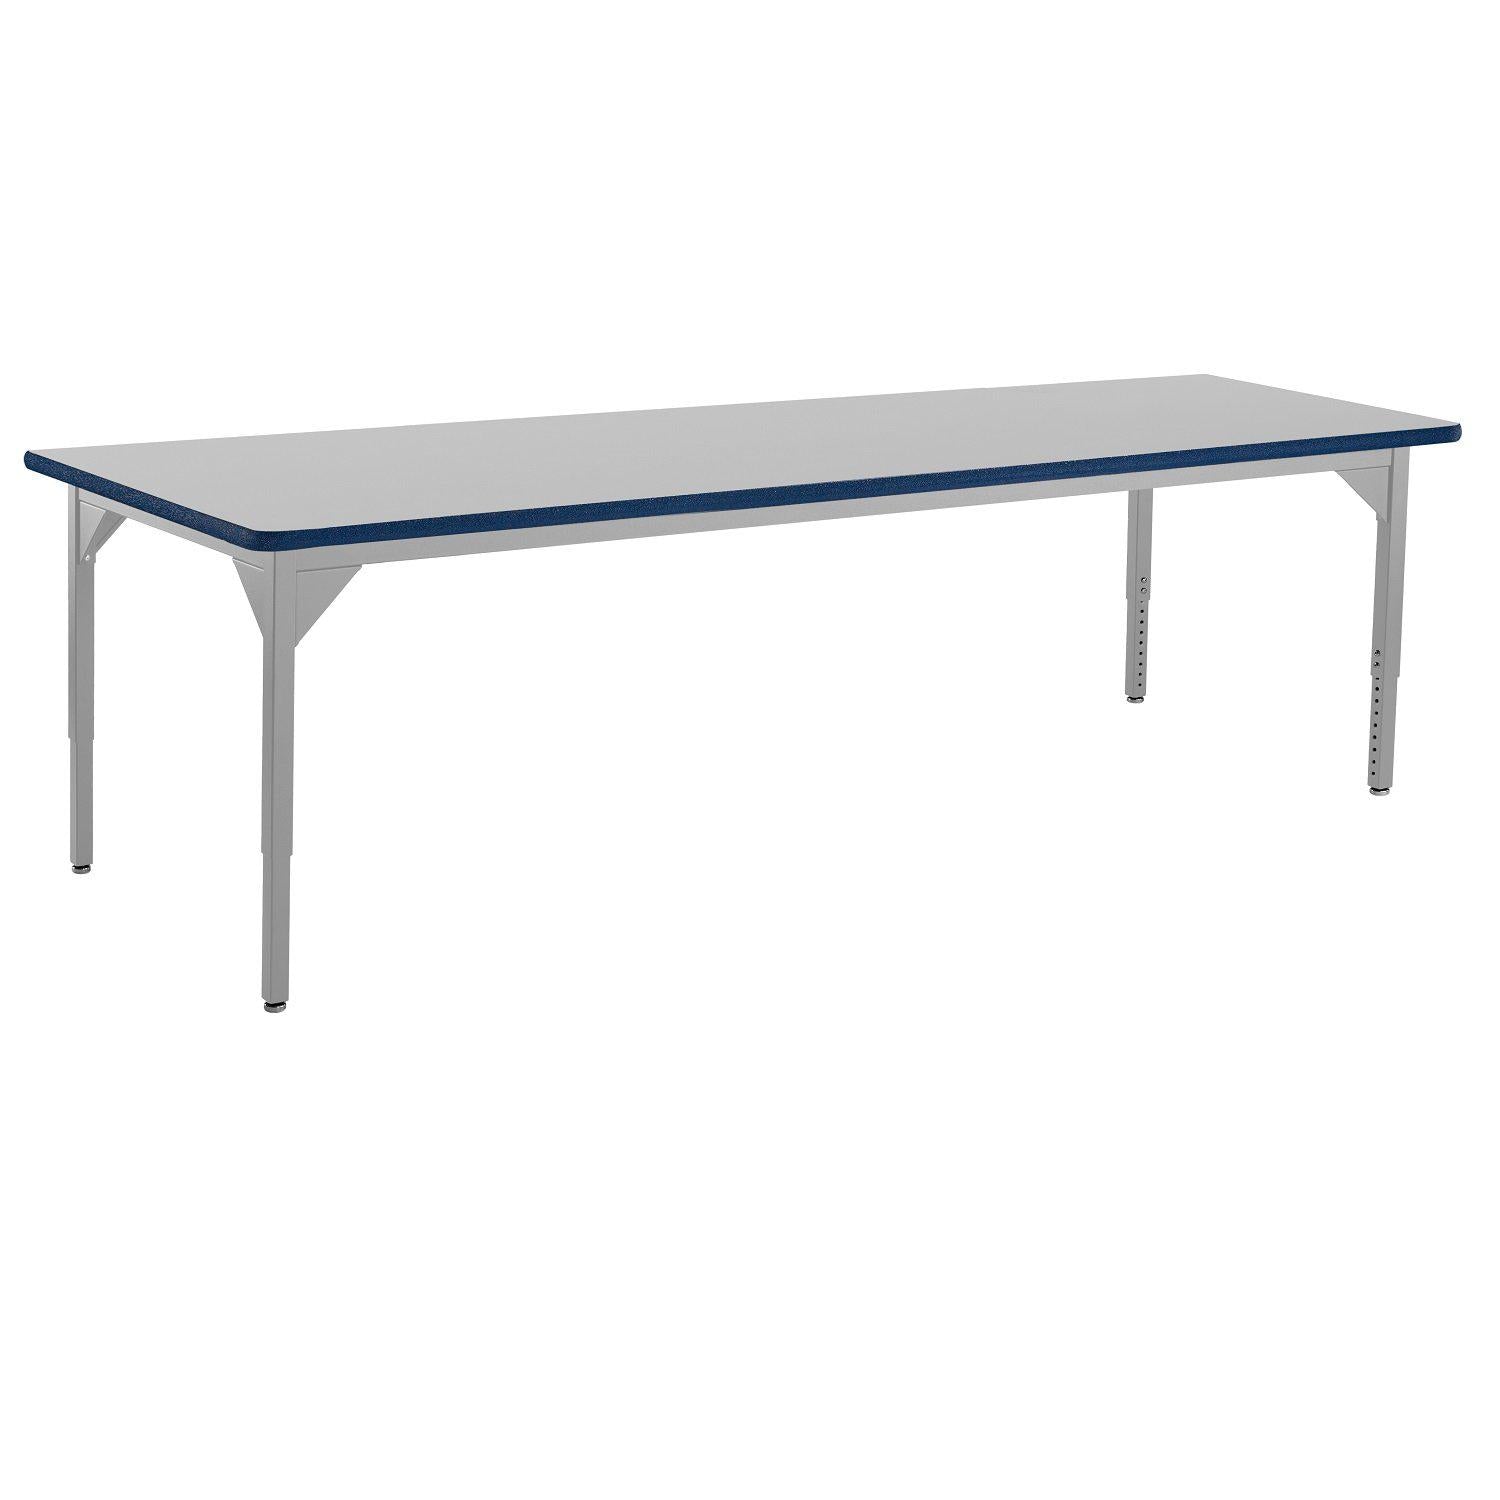 Heavy-Duty Height-Adjustable Utility Table, Soft Grey Frame, 36" x 72", Supreme High-Pressure Laminate Top with Black ProtectEdge